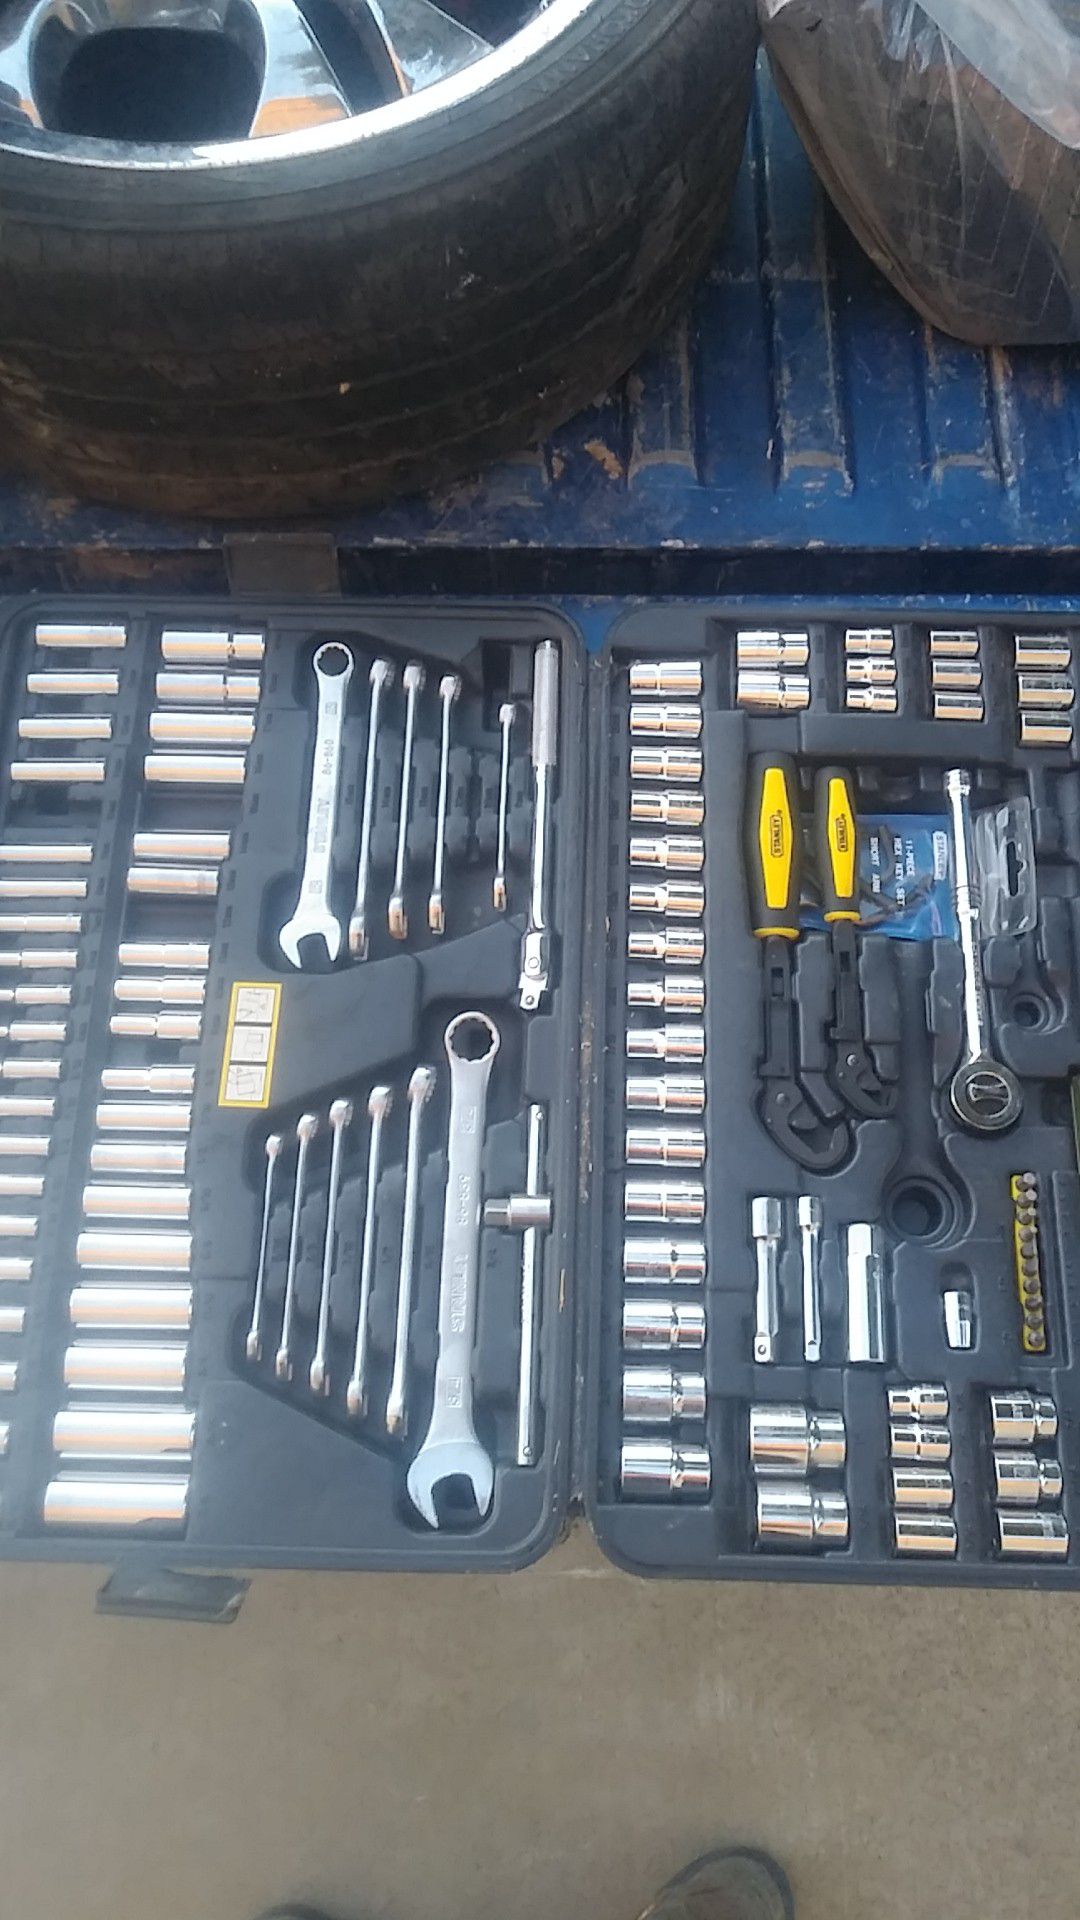 Stanley nearly complete tool set